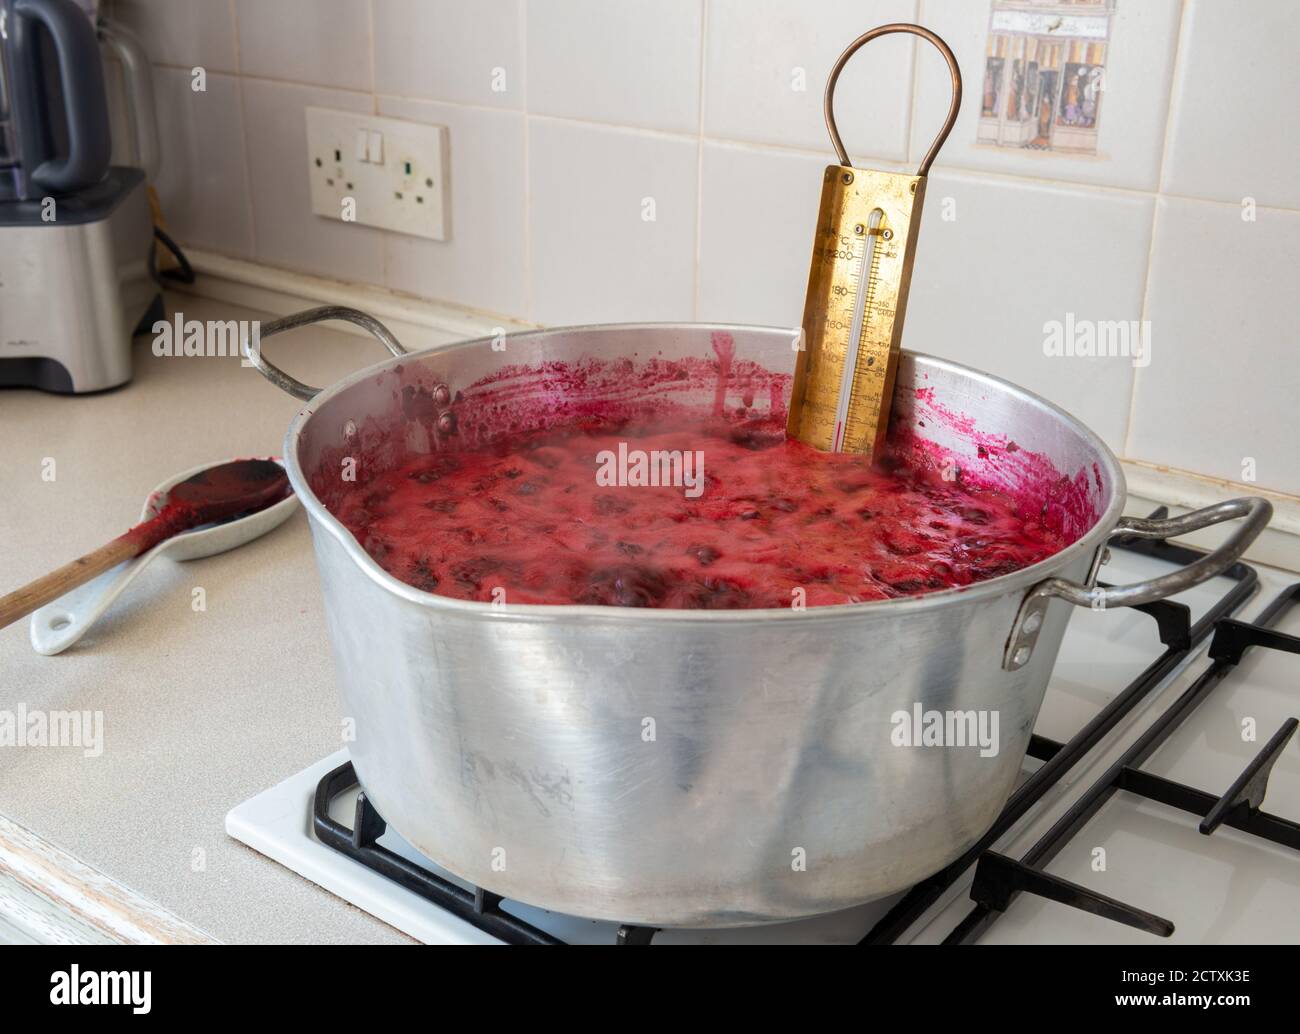 Jam making - a traditional brass thermometer in a preserving pan of boiling blackberry and apple jam Stock Photo